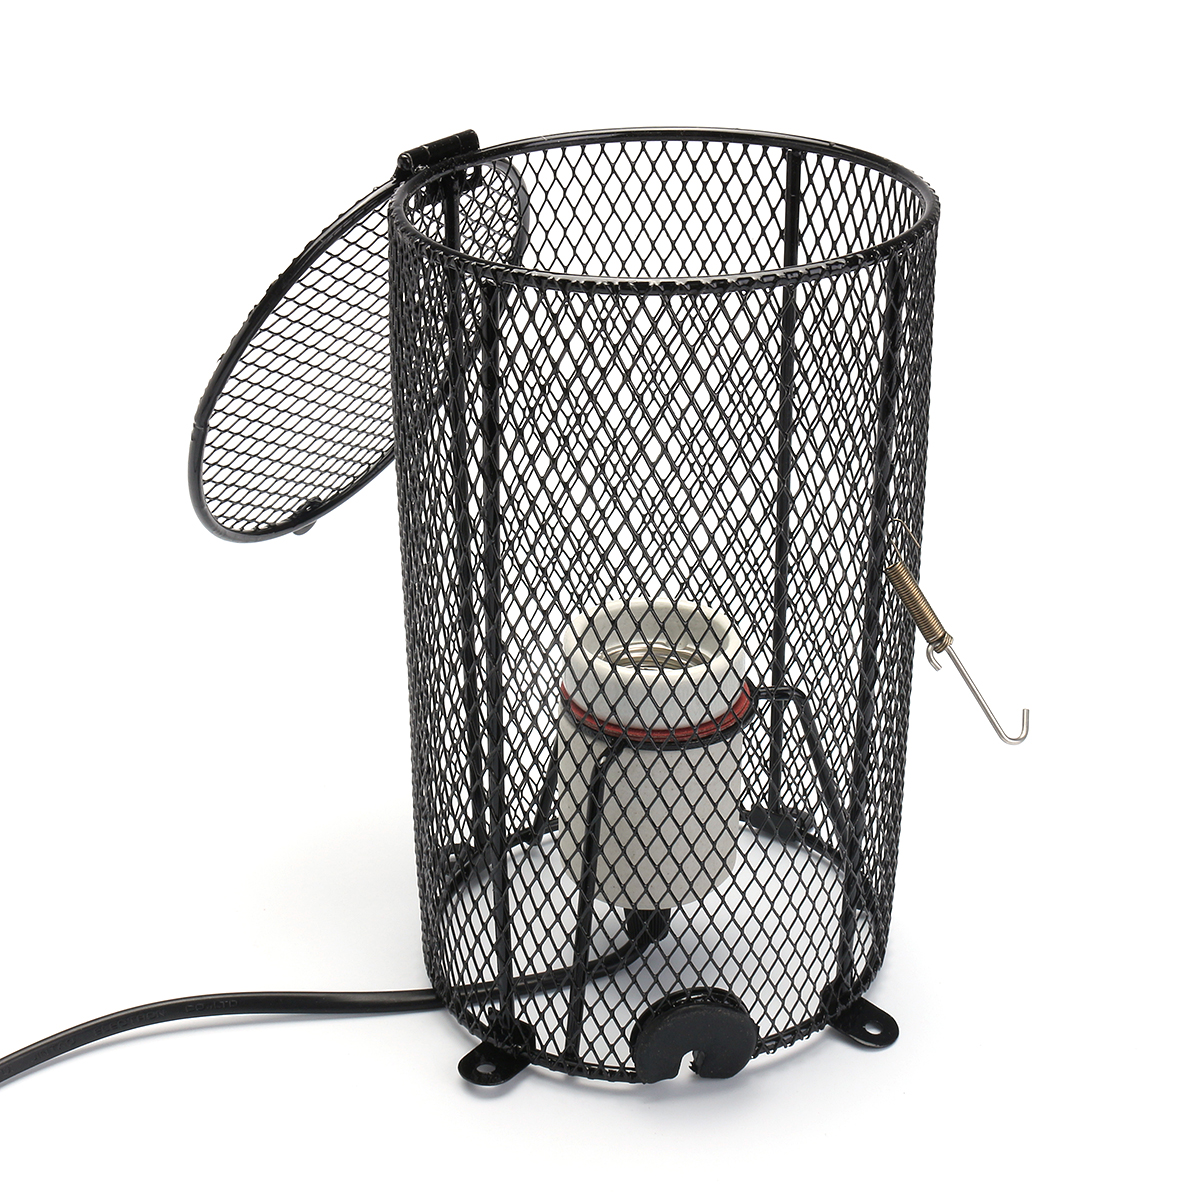 

E27 200W Infrared Ceramic Heat Lamp Holder + Mesh Cage Protector Cover for Reptile Brooder